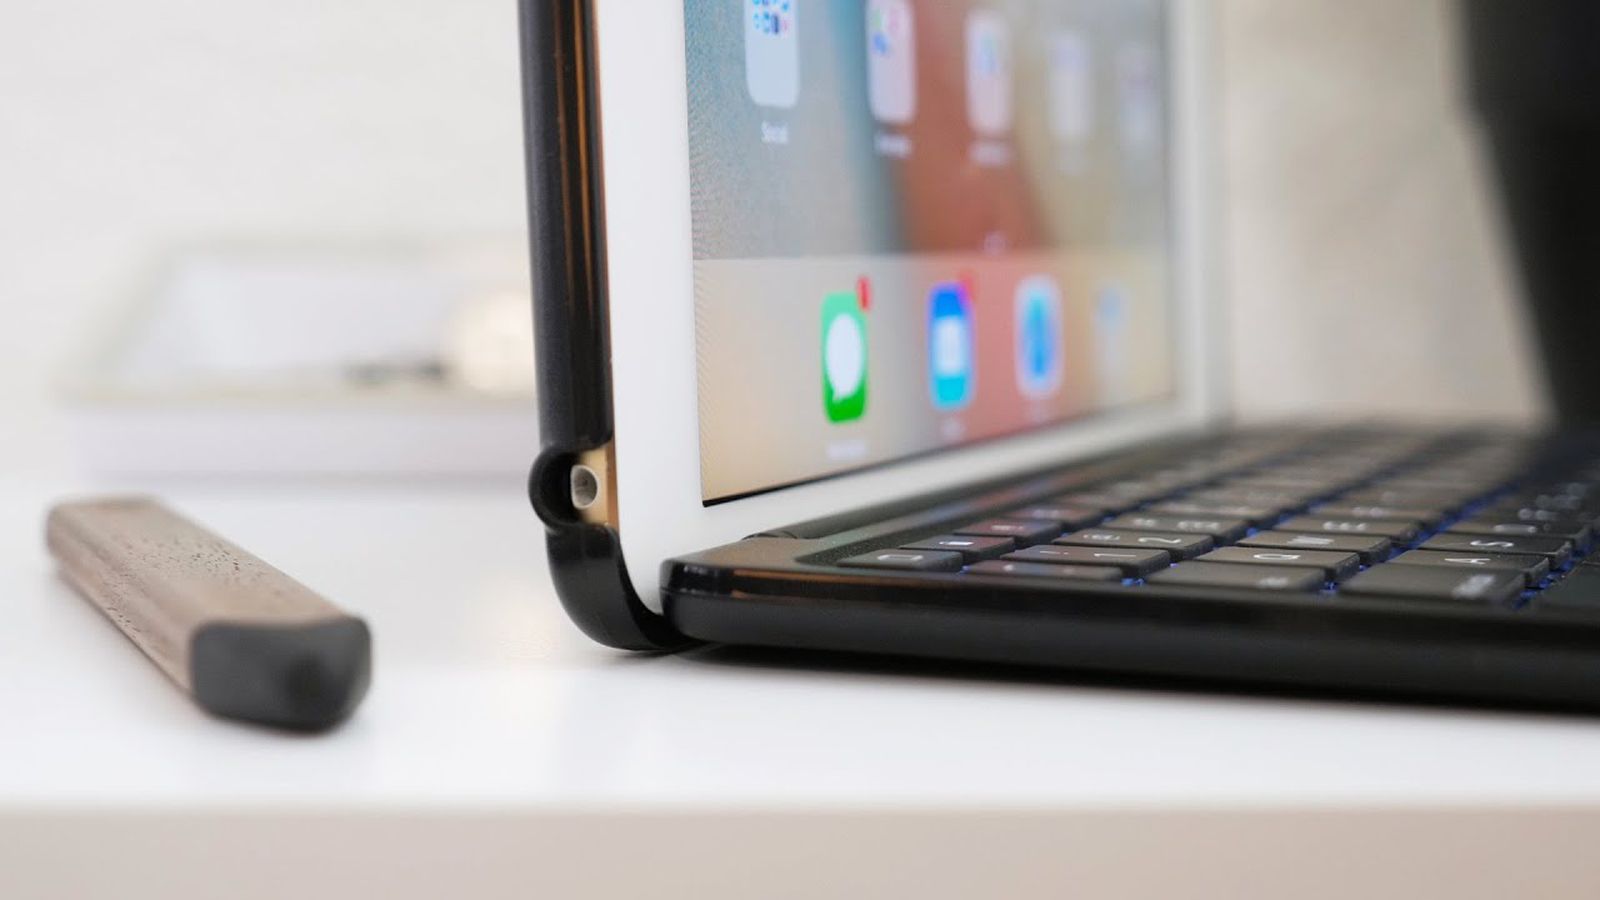 Video Review: Zagg’s Folio Keyboard Case for iPad Air 2